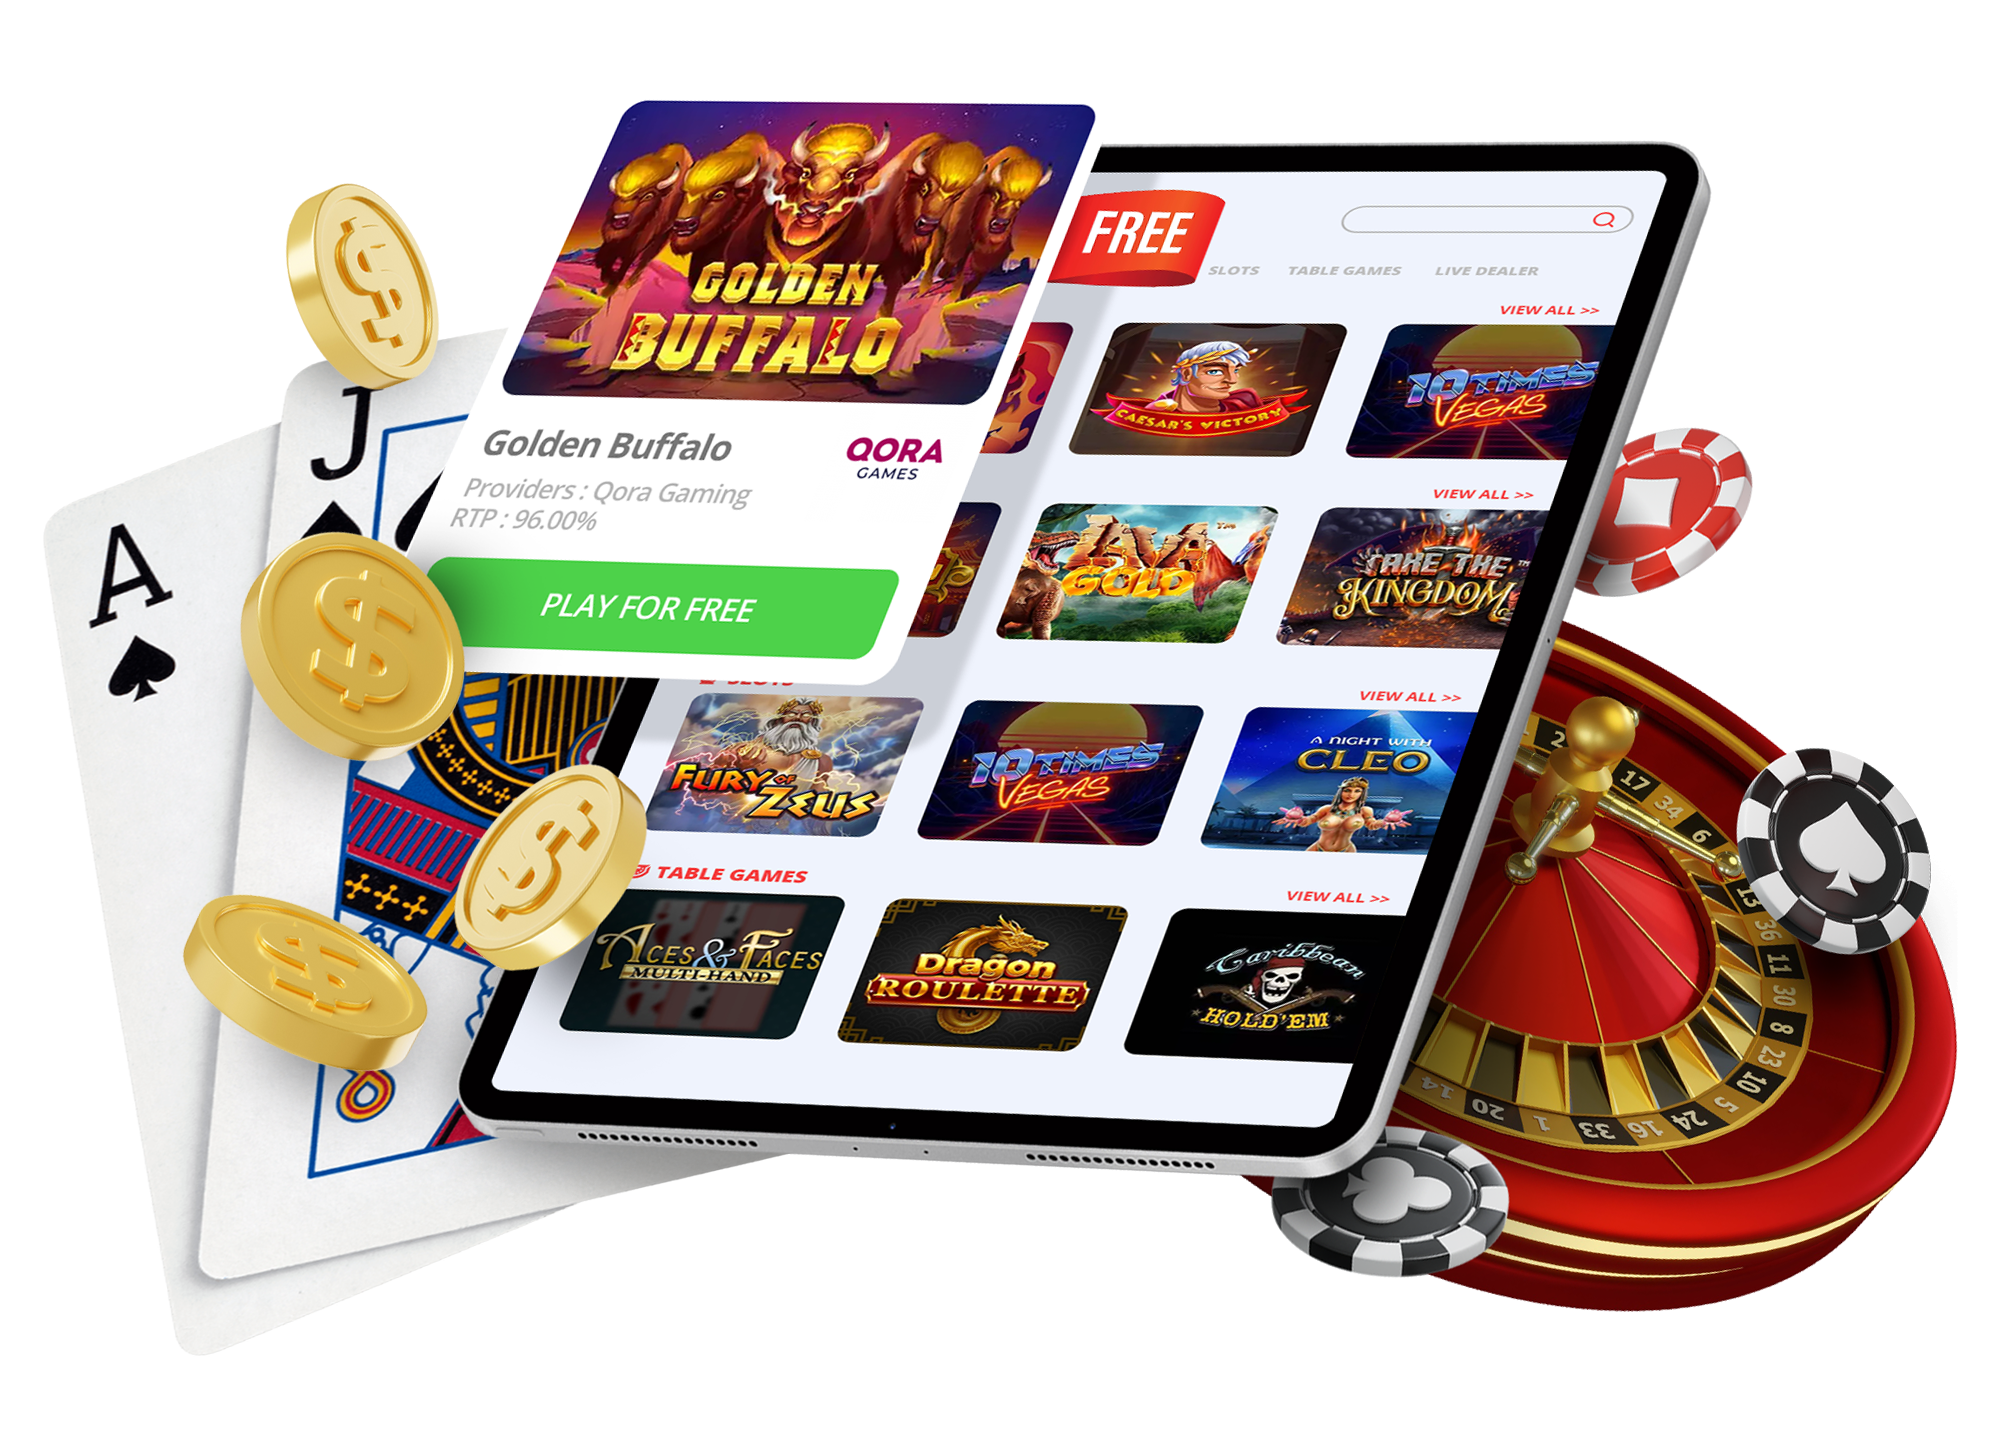 Enjoying Indian-Culture Inspired Slot Games Online - What Do Those Stats Really Mean?